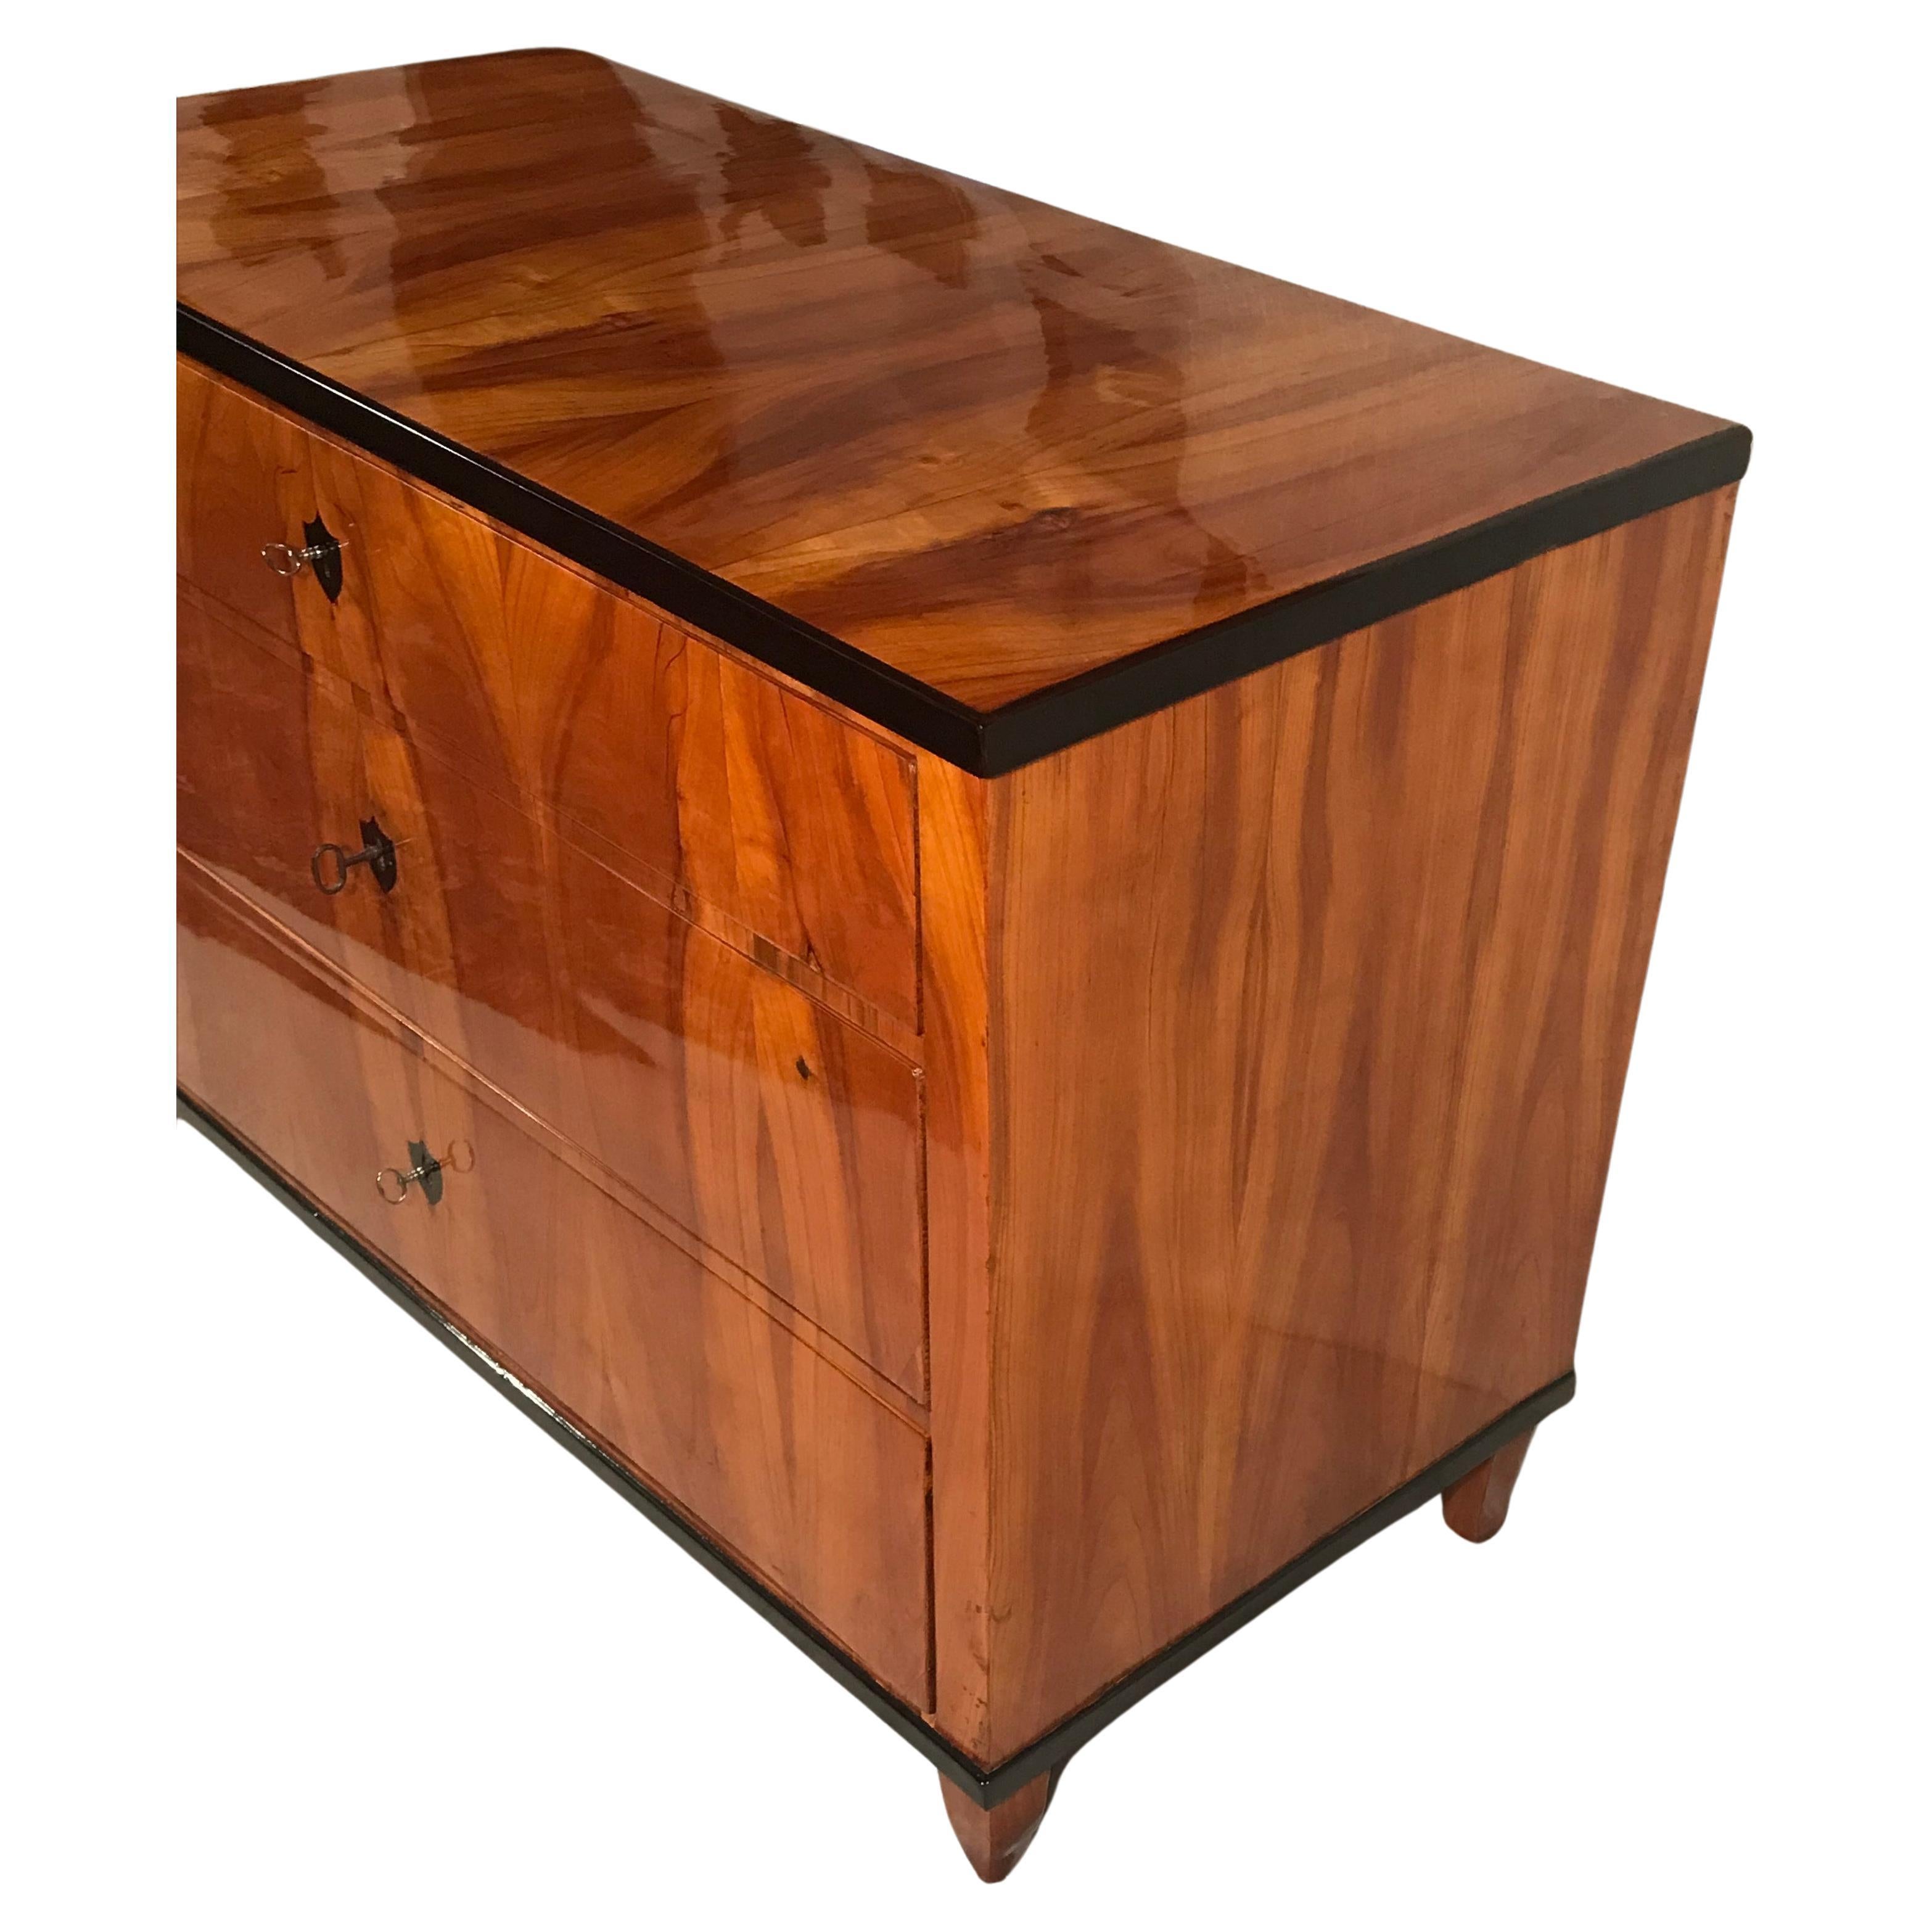 Discover a unique Biedermeier dresser dating back to around 1820, originating from southern Germany. This exquisite piece features a stunning book-matched European cherry veneer with ebonized details, showcasing the craftsmanship of the era.

With